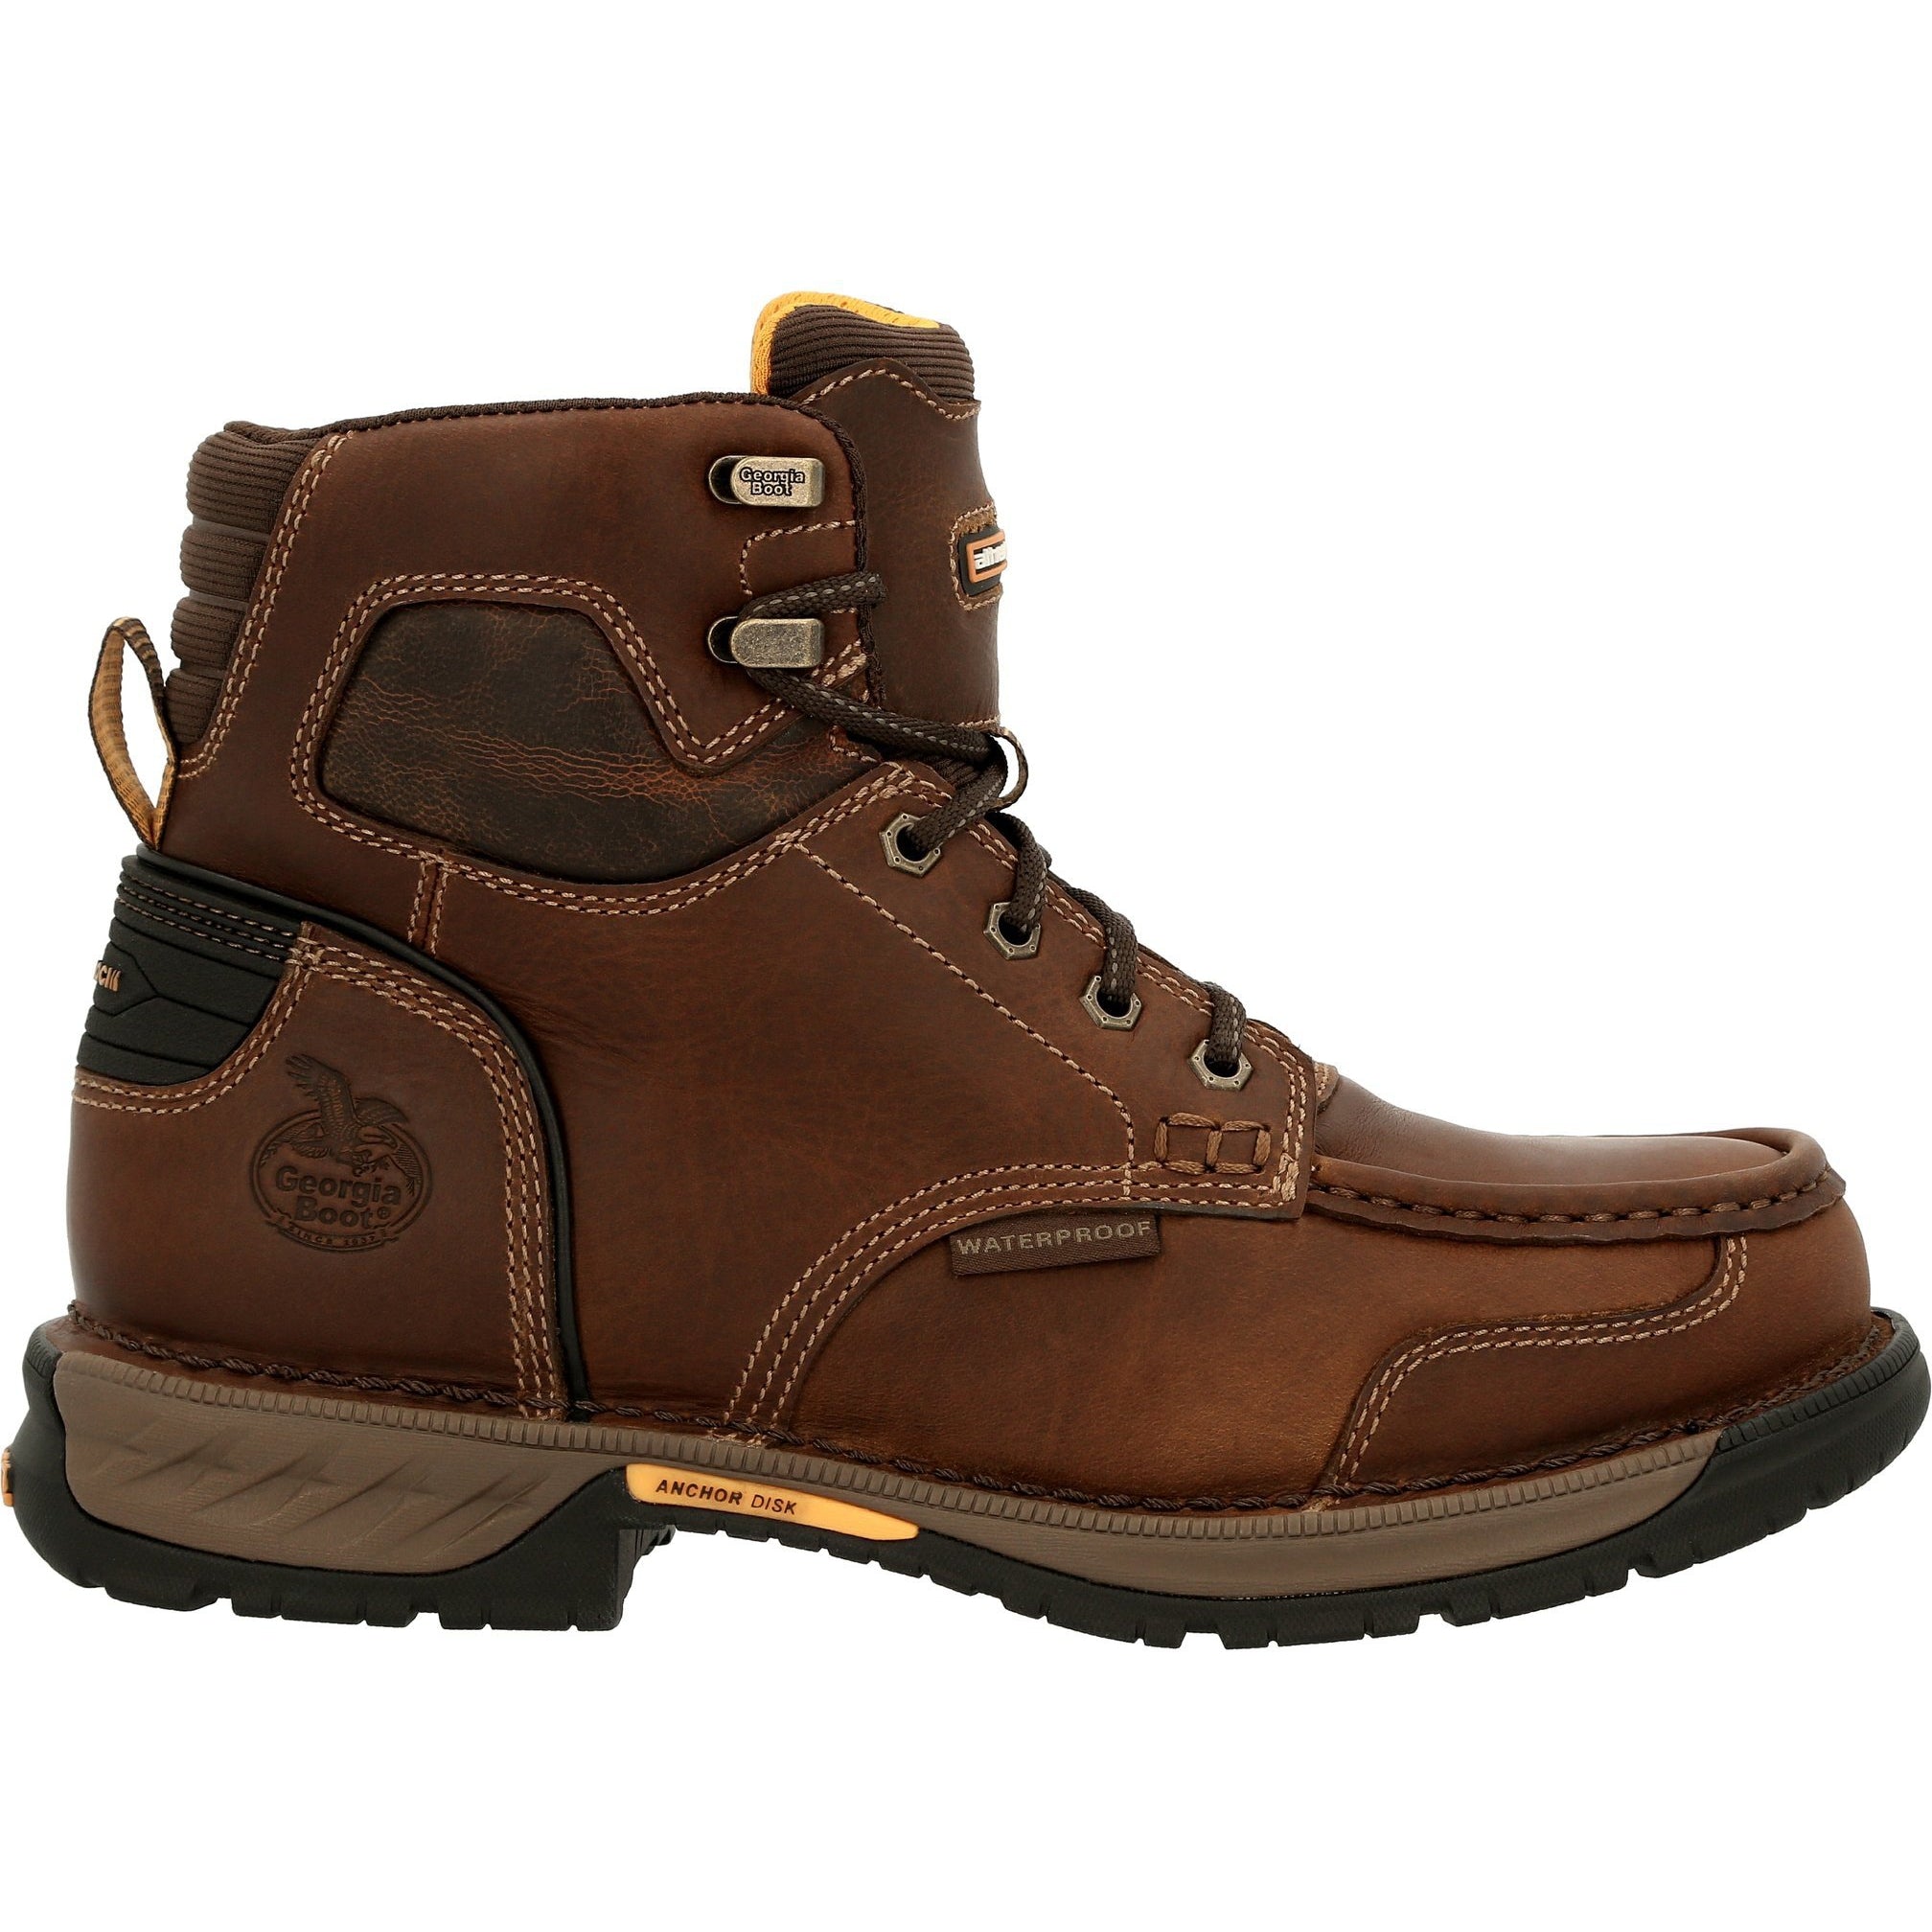 Georgia Men's Athens 360 5" Soft Toe WP Work Boot - Brown - GB00439  - Overlook Boots